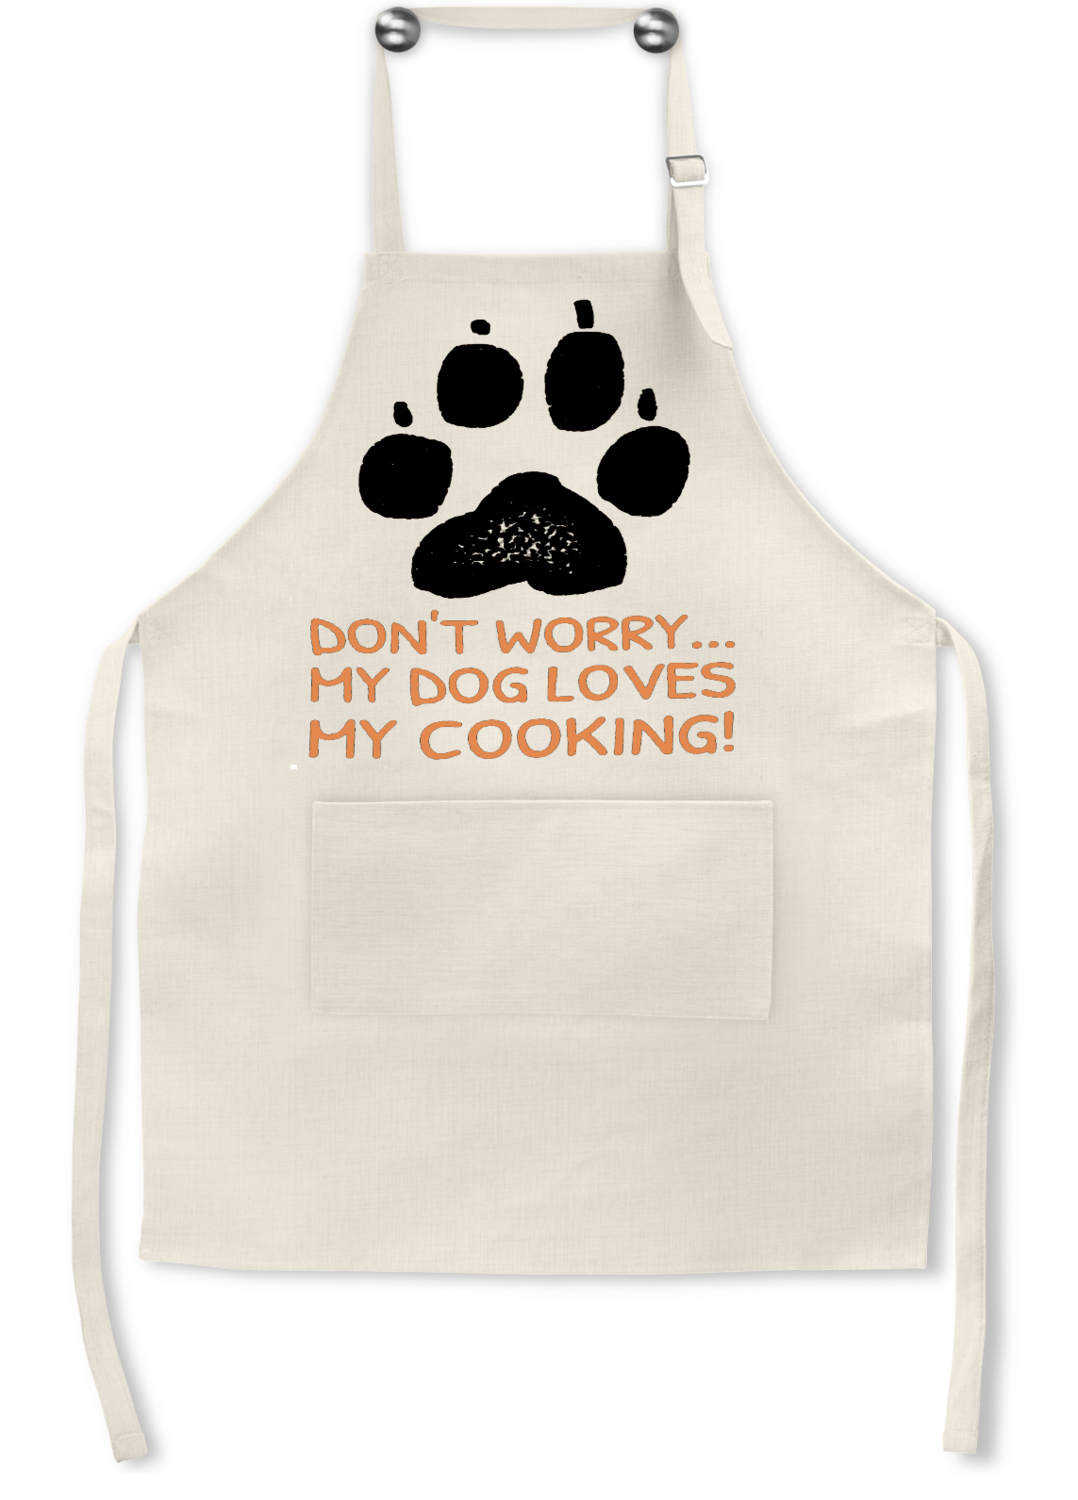 Dog Apron: DON'T WORRY, MY DOG LOVES MY COOKING!